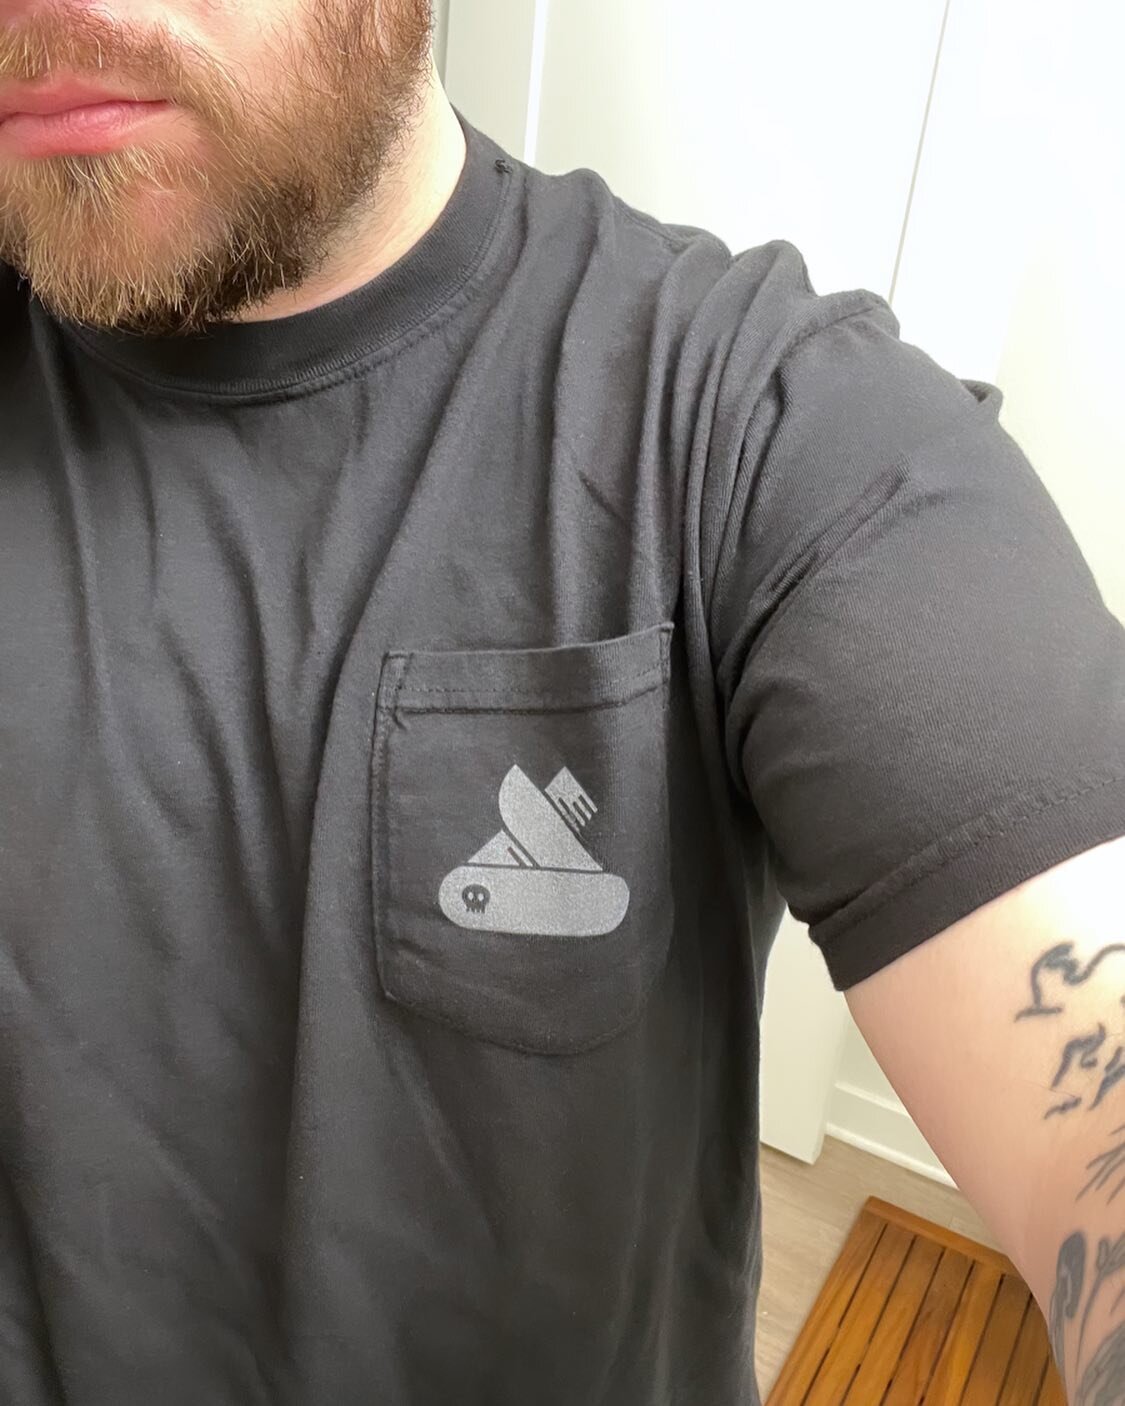 Pocket T + logo is making me feel things. I could have gone a few shades darker with the print though. I think I&rsquo;m going to try some kind of shiny black material on black shirts next. #graphicdesigner #printer #remember